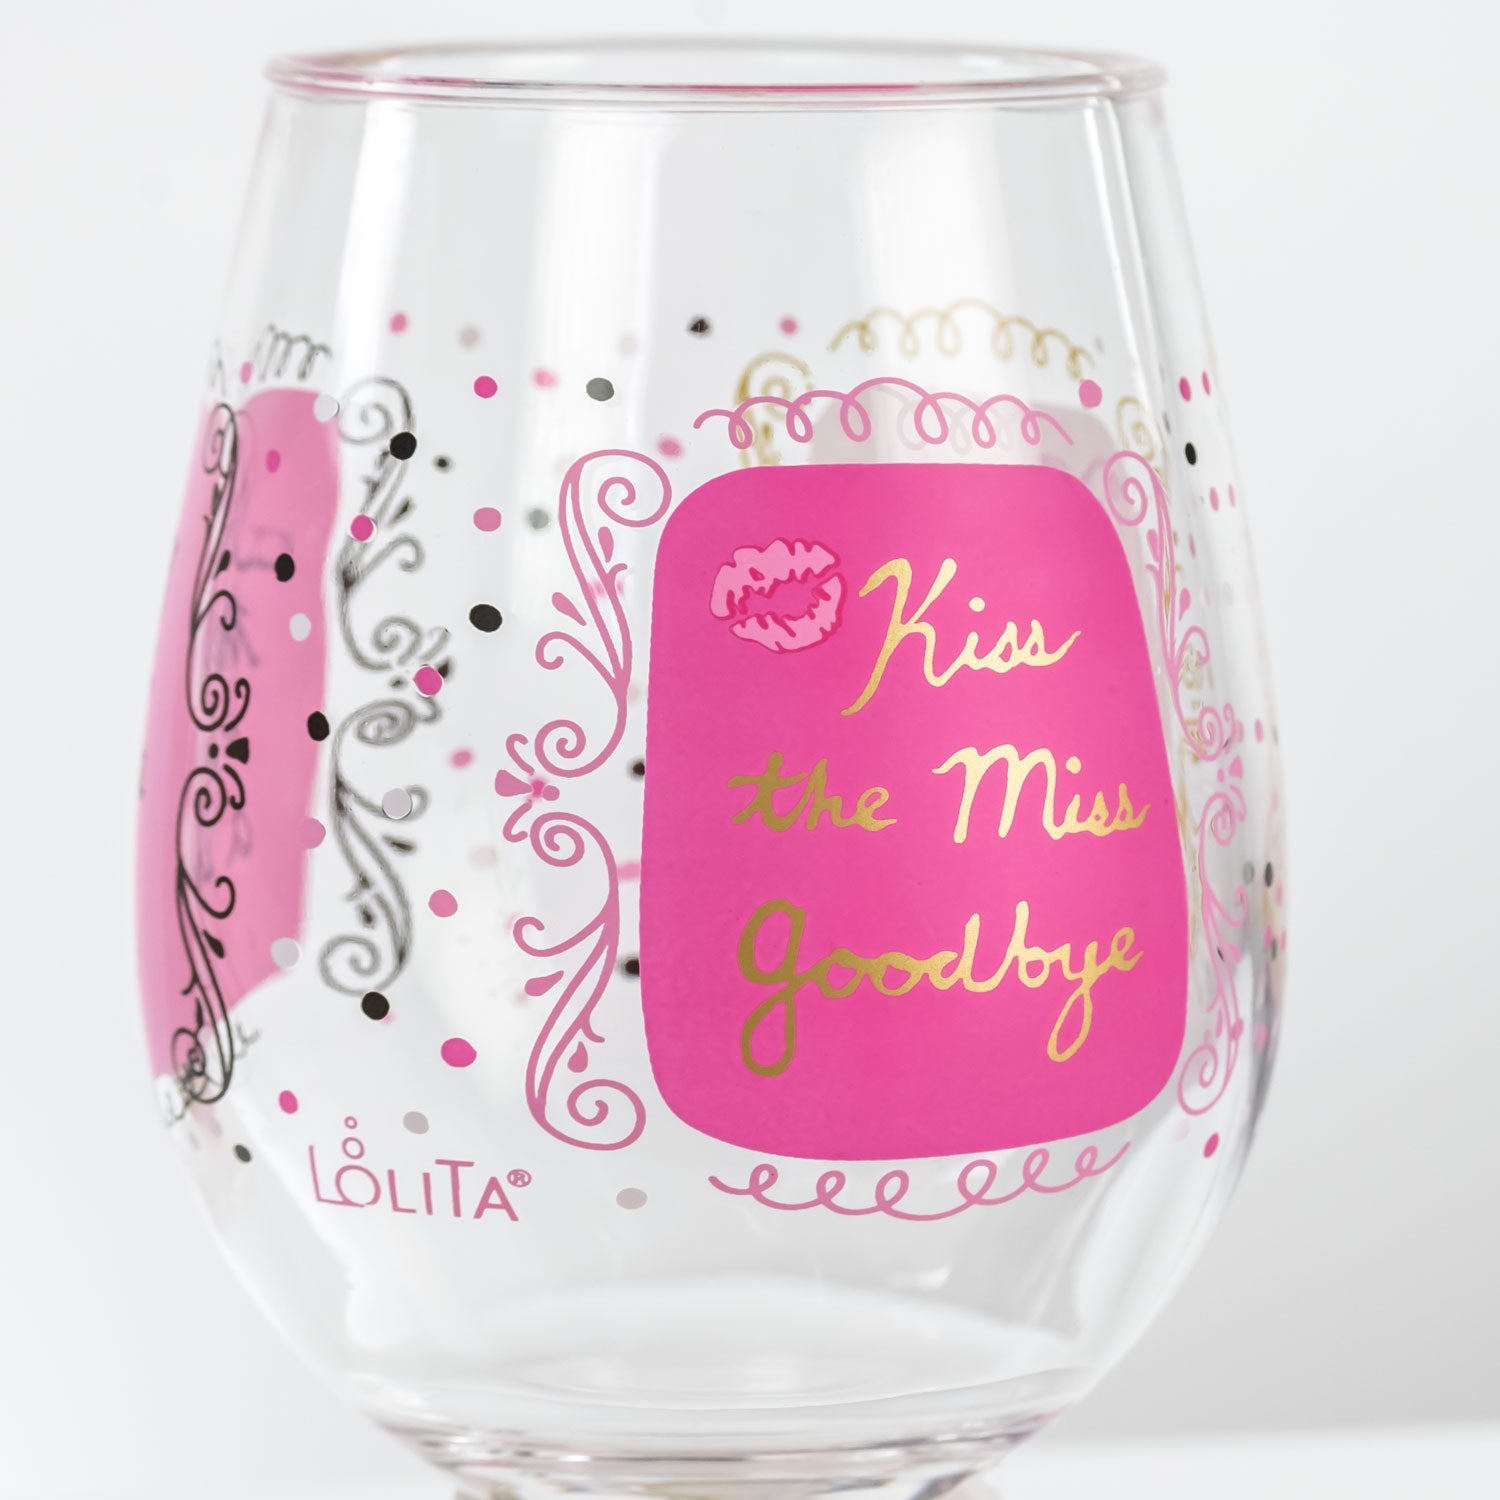 Party To Go by Lolita Bachelorette 15oz Acrylic Stemless Wine Glasses